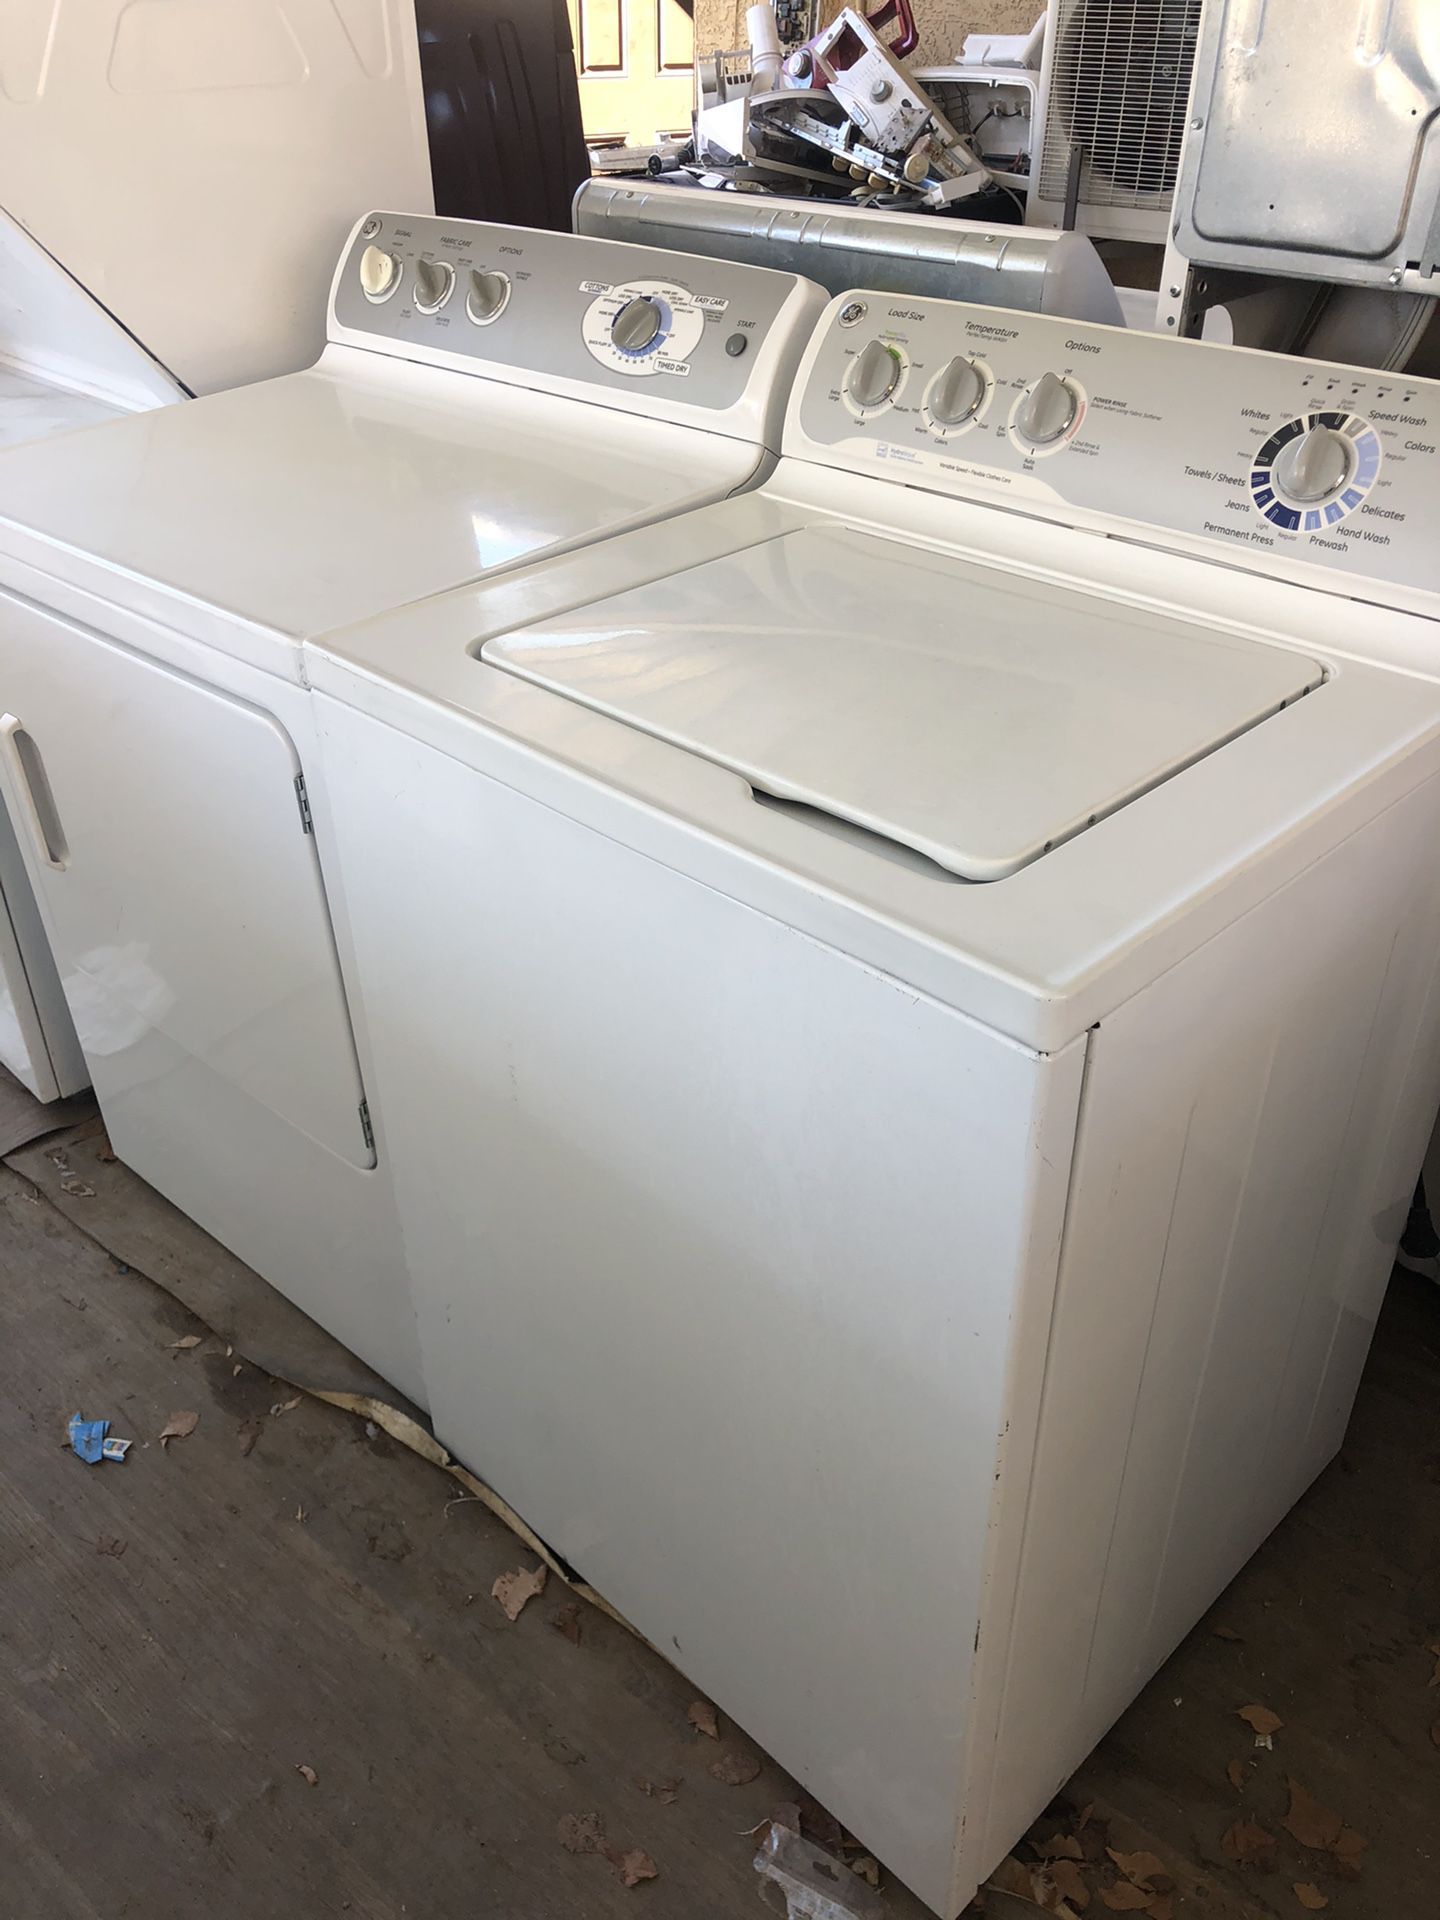 Gas washer dryer set for $350